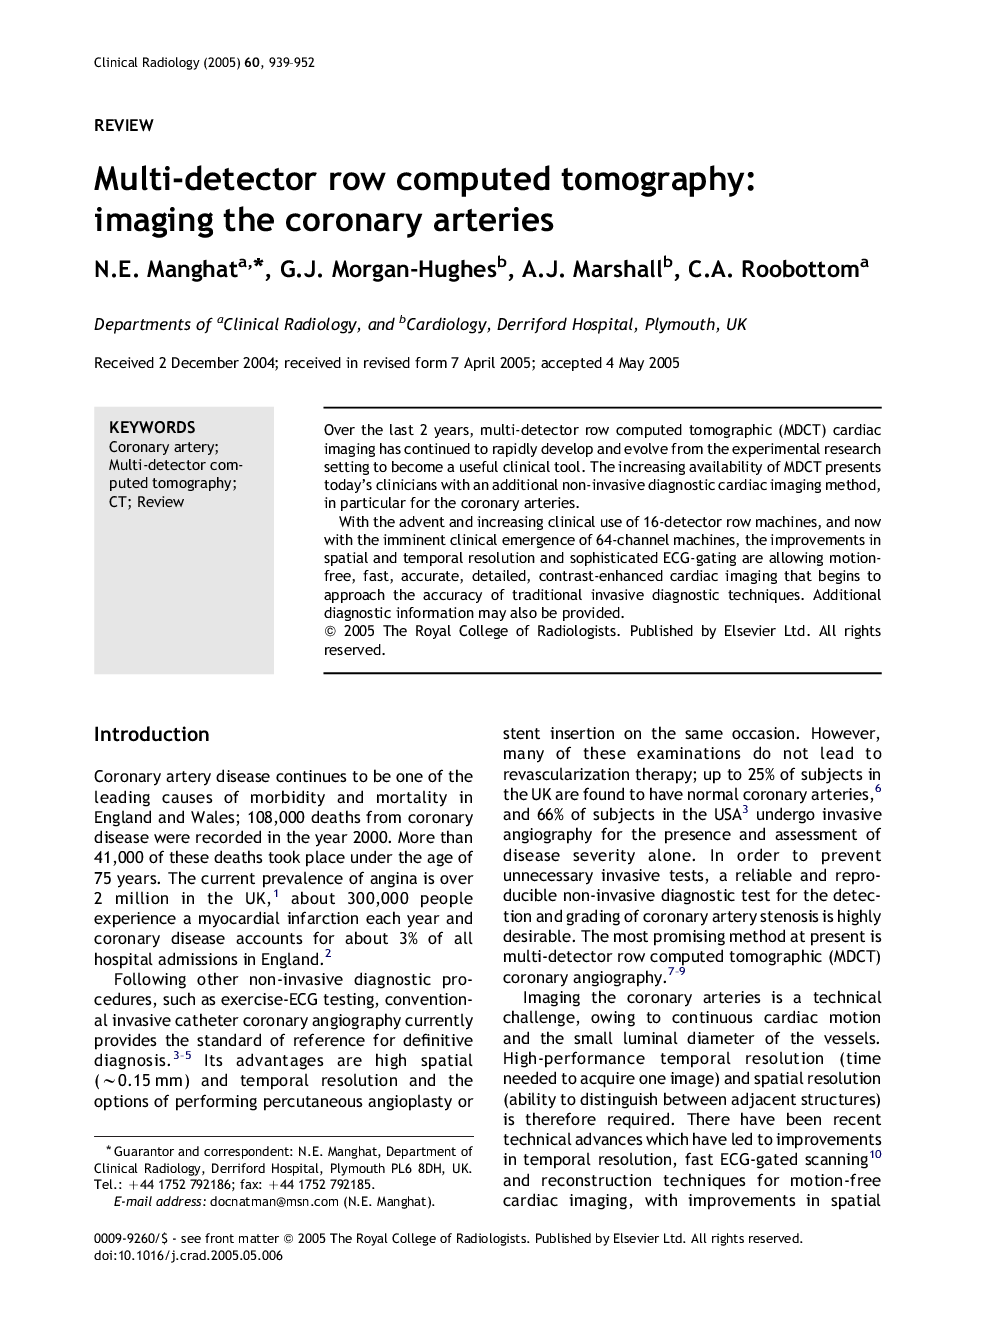 Multi-detector row computed tomography: imaging the coronary arteries